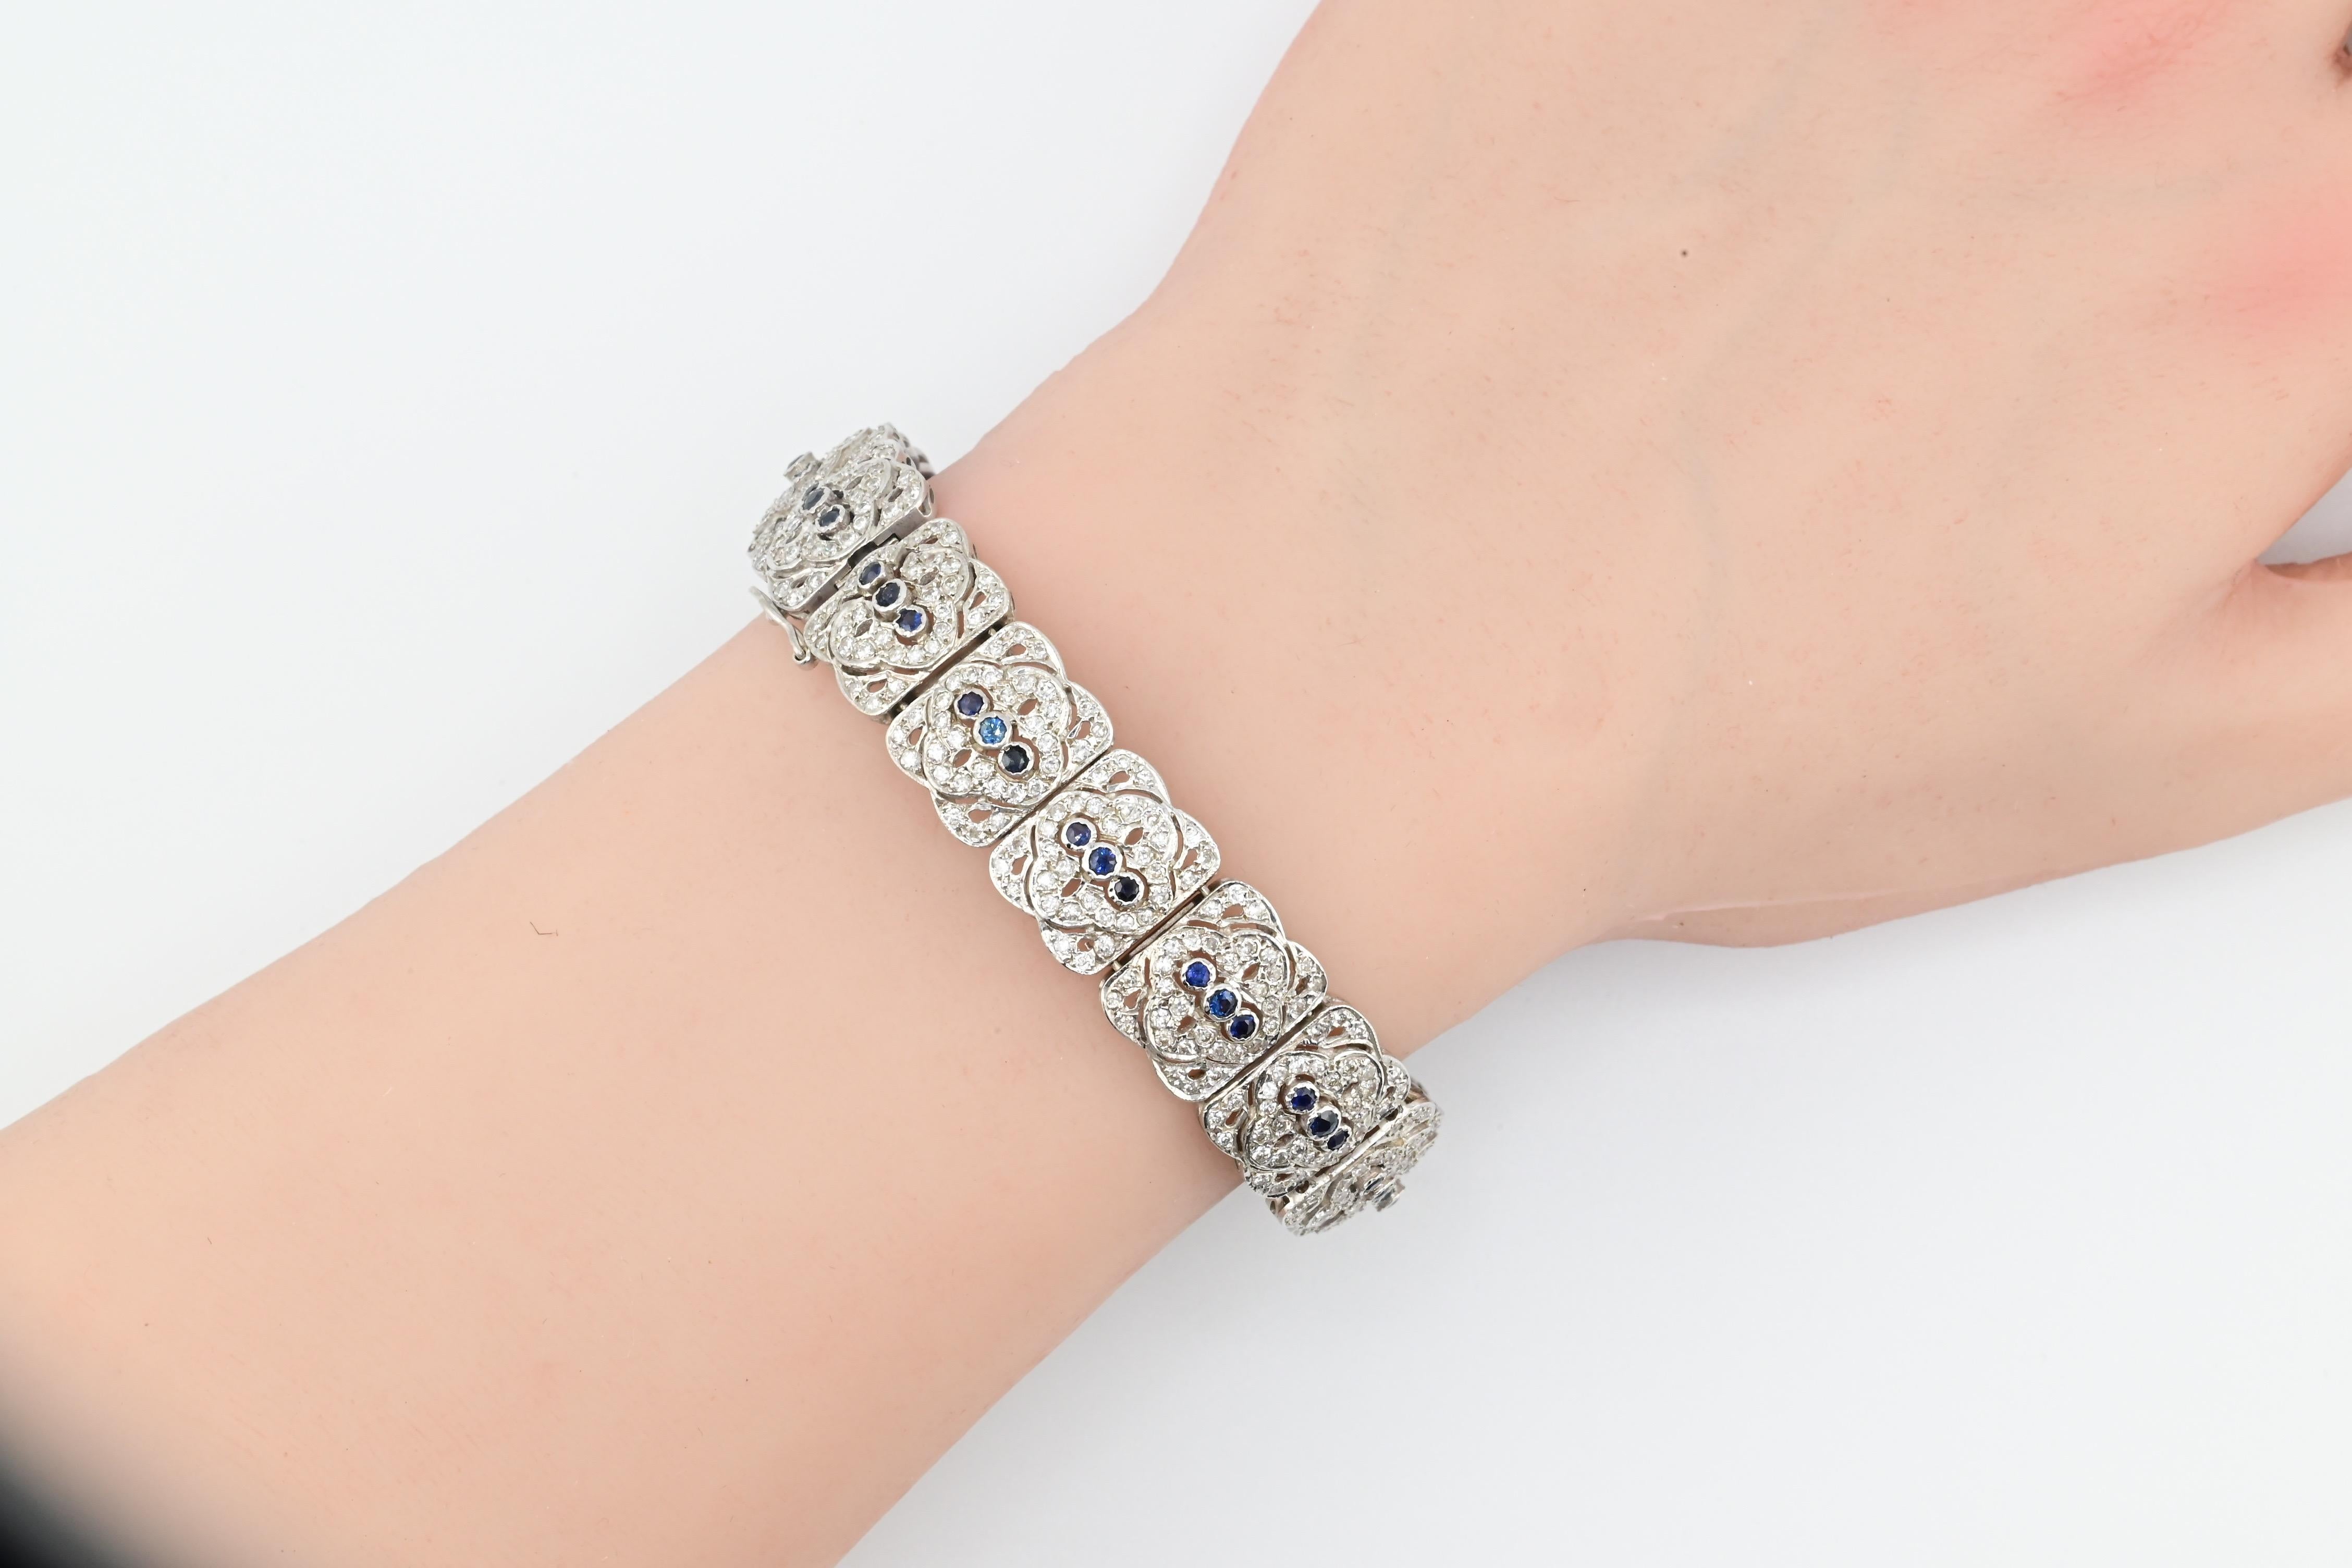 This stunning Art Deco style bracelet is a timeless piece of fine jewelry that will add glamour to any collection. Crafted from 18K white gold, it features a total of 4.92 carats of sparkling diamonds, making it a true statement piece. With a weight